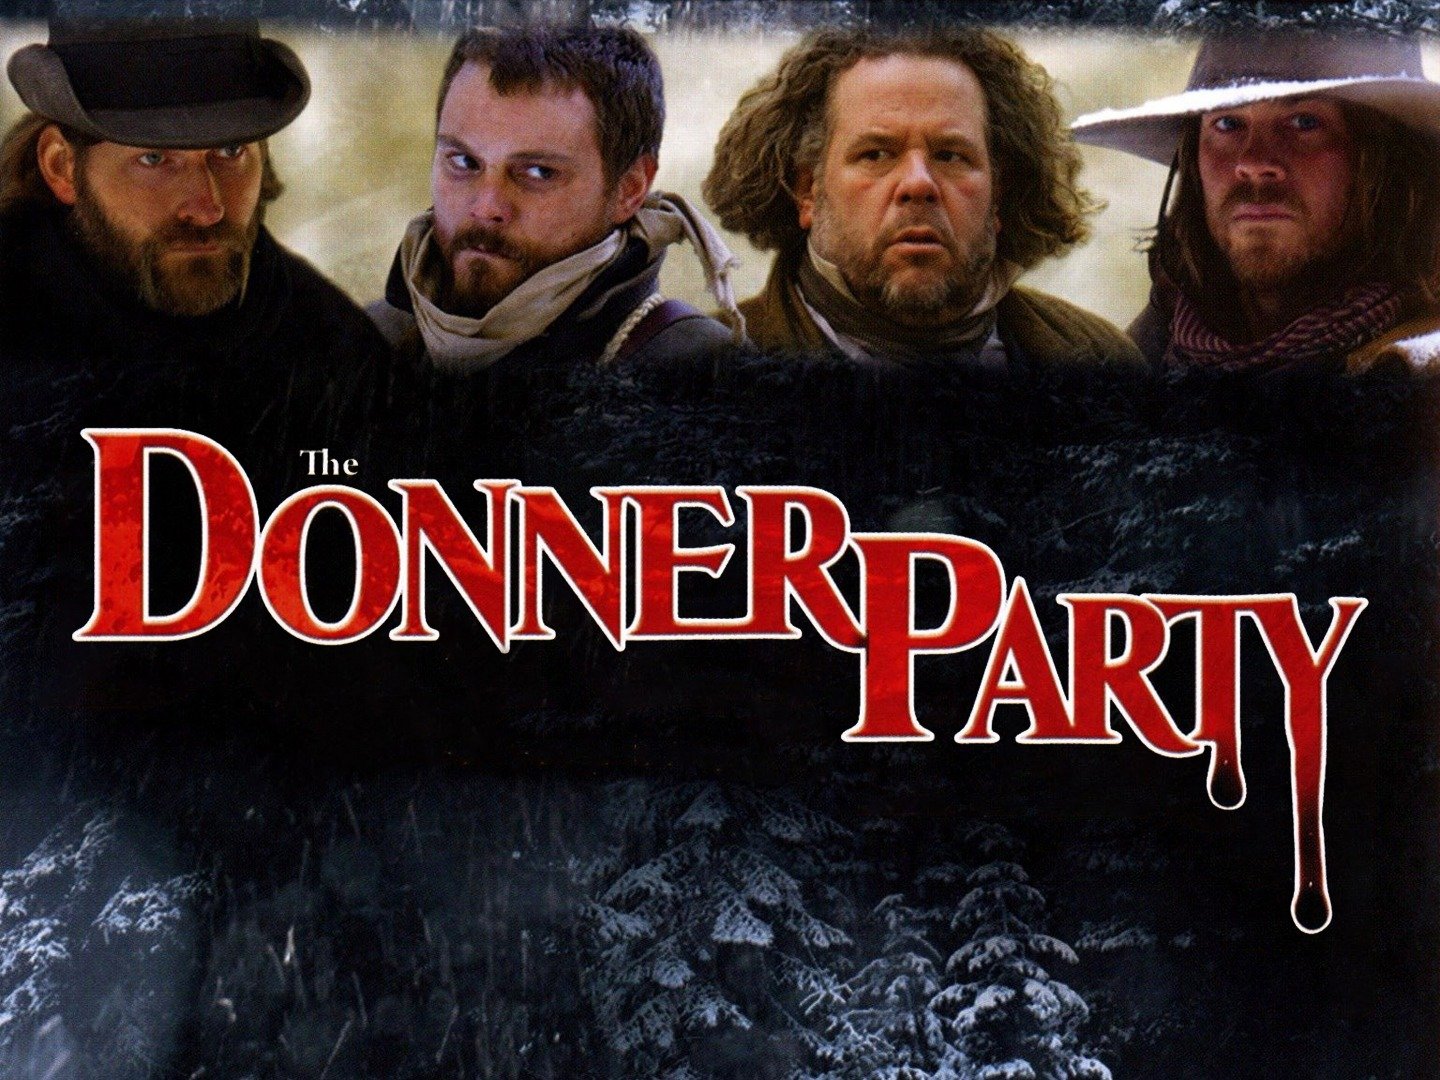 The Donner Party Movie Reviews